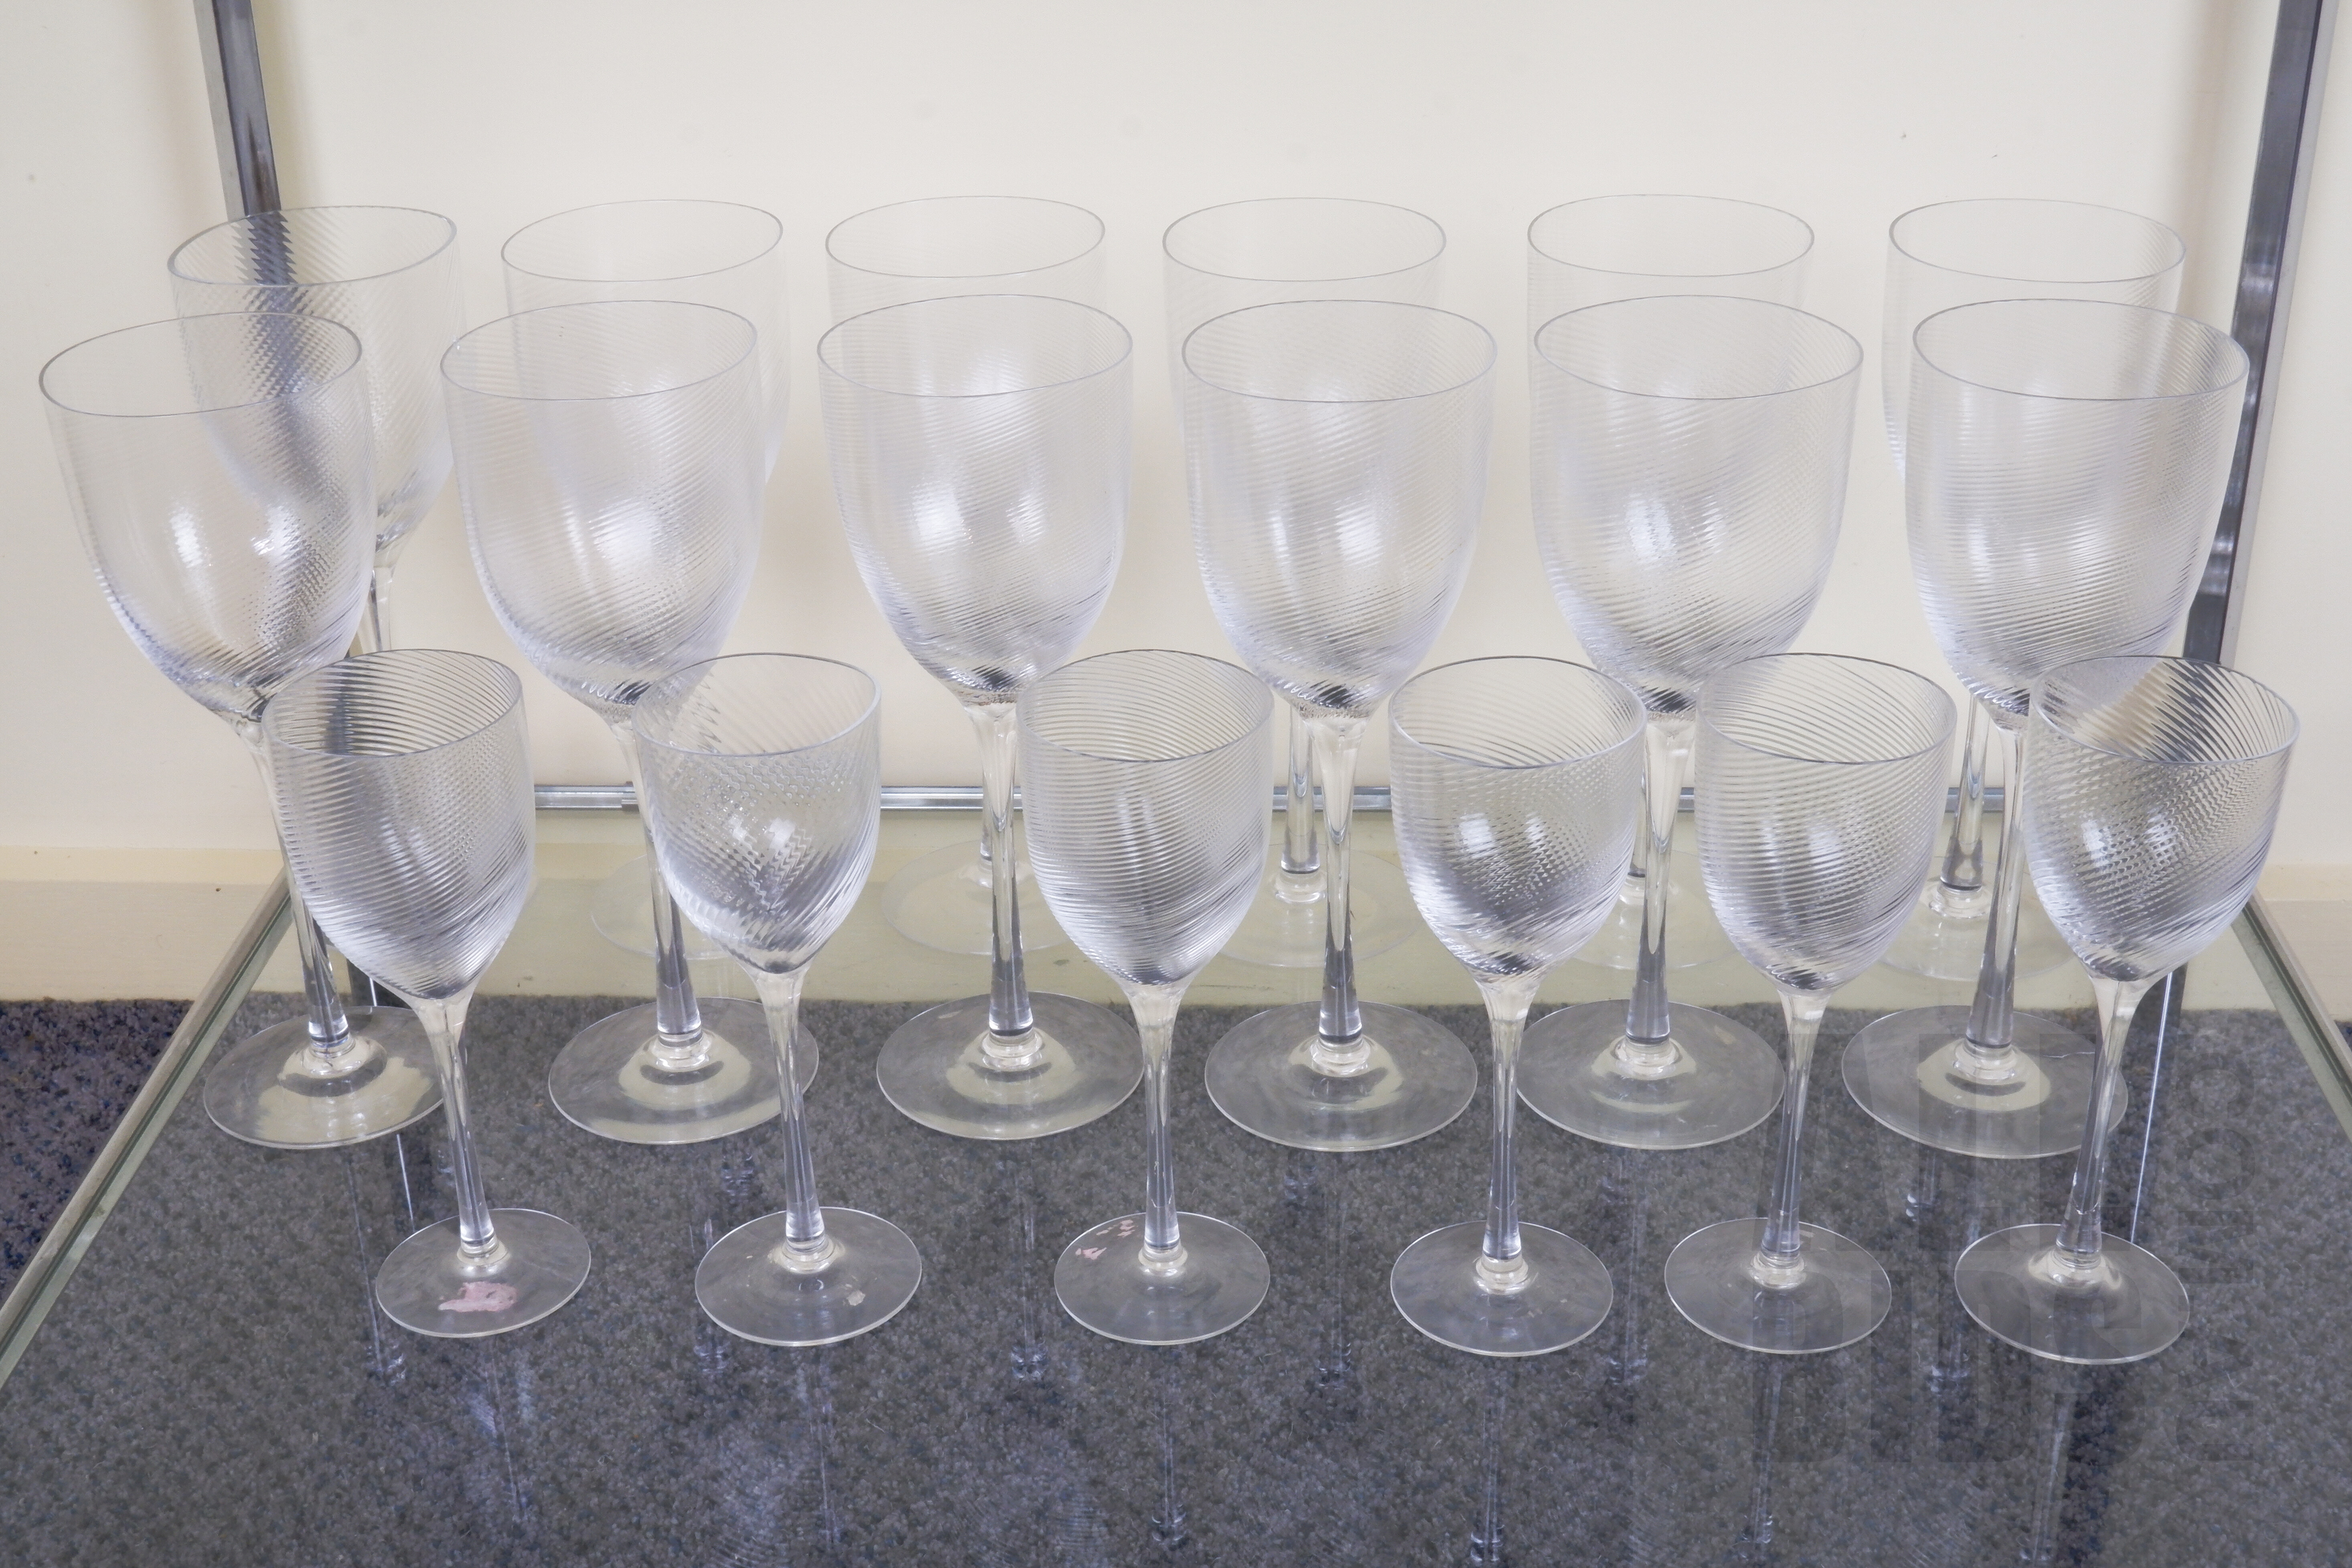 'Good Vintage Crystal Stemware Service with Swirl Pattern to Bowl, 16 Pieces'